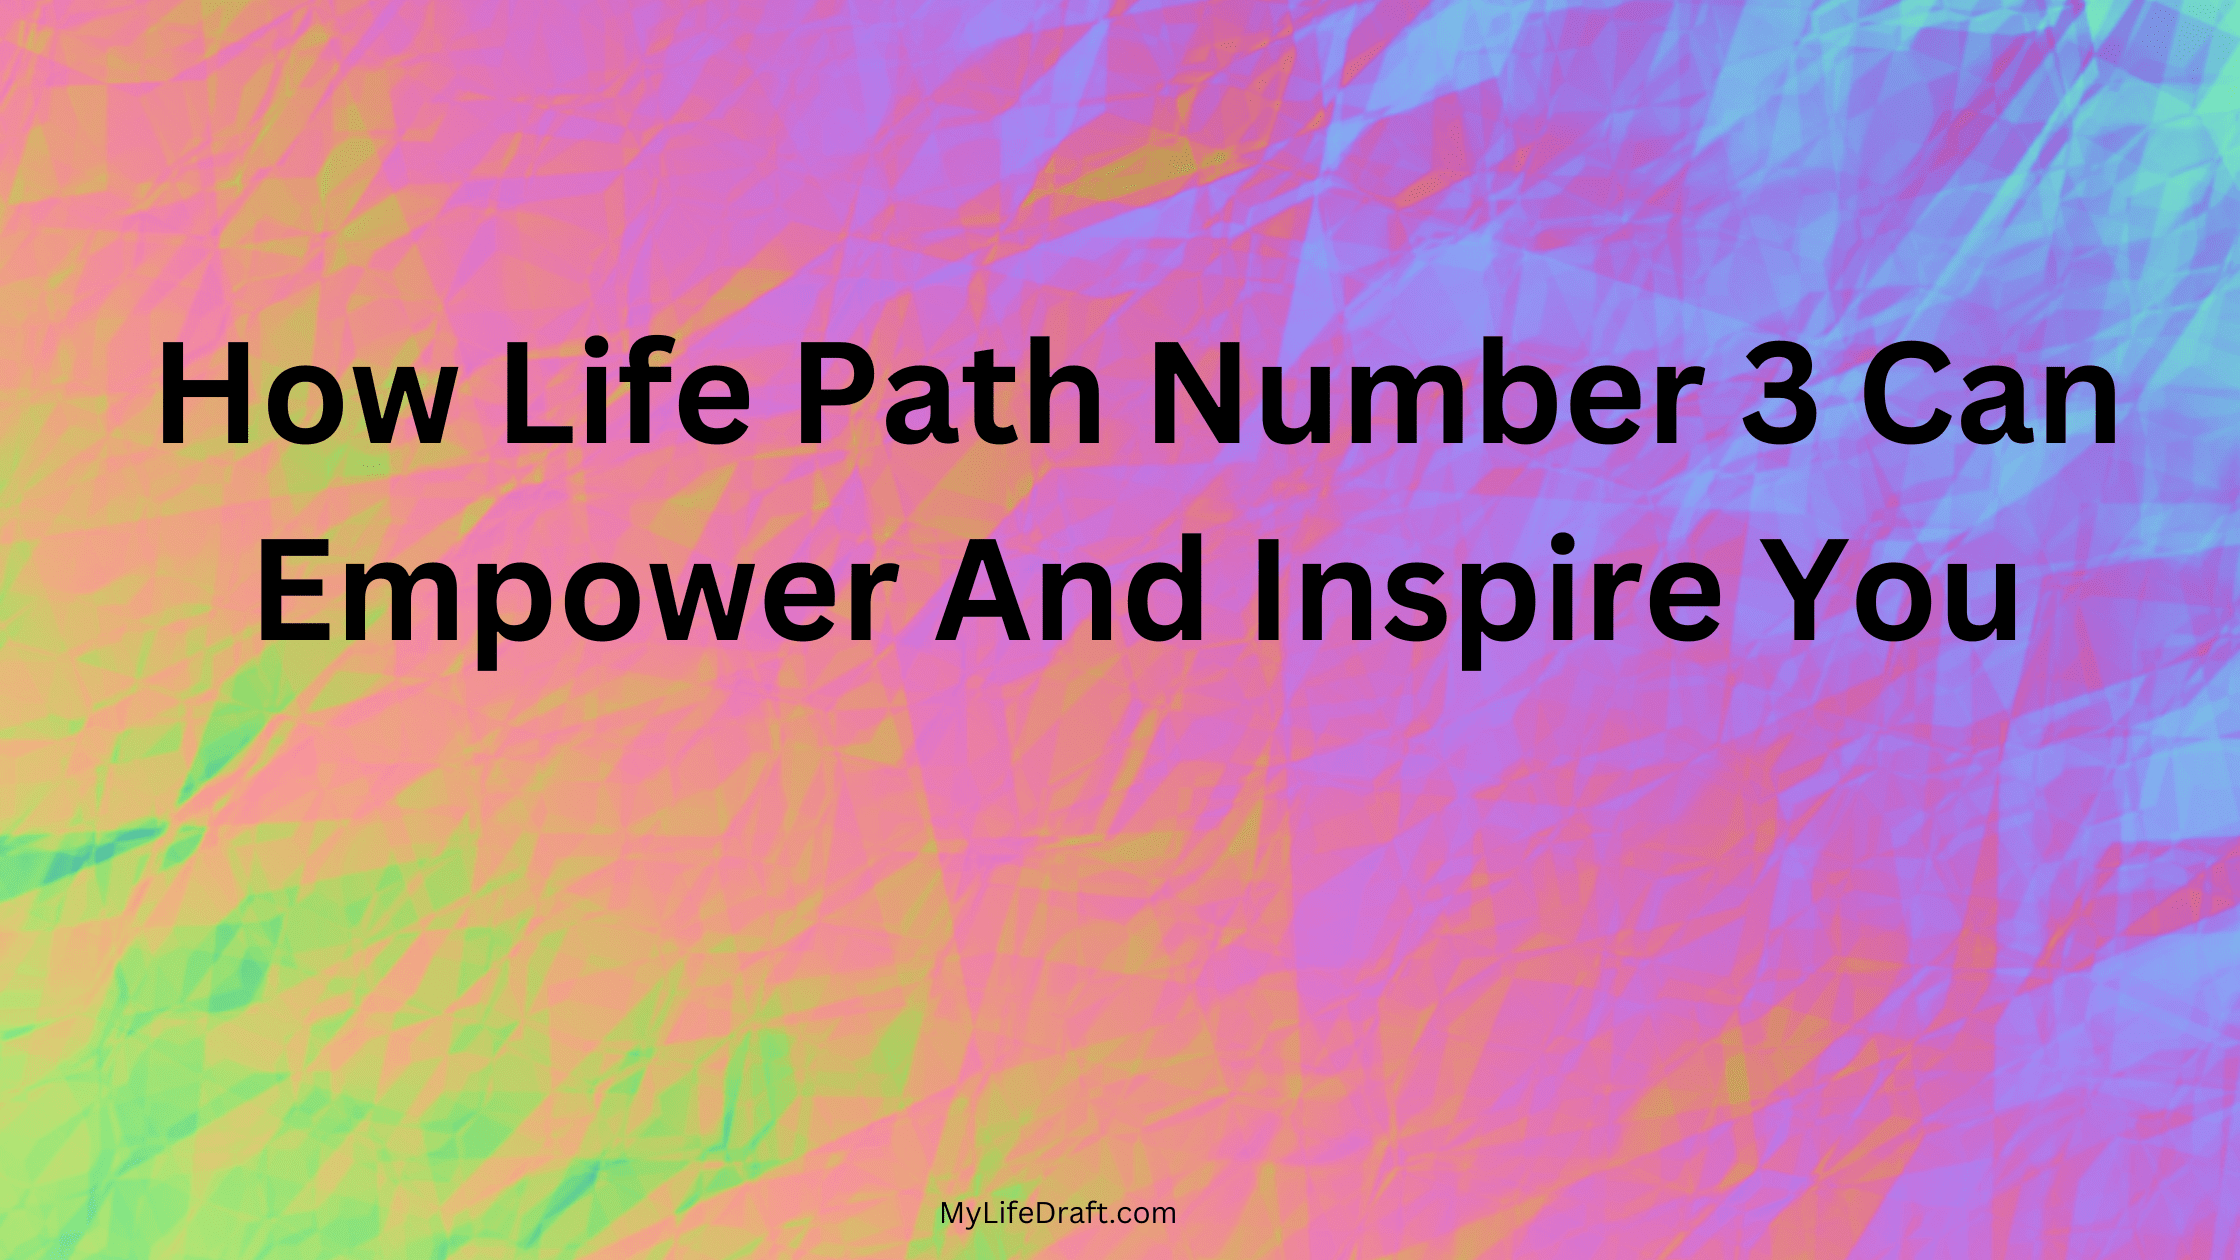 How Life Path Number 3 Can Empower And Inspire You